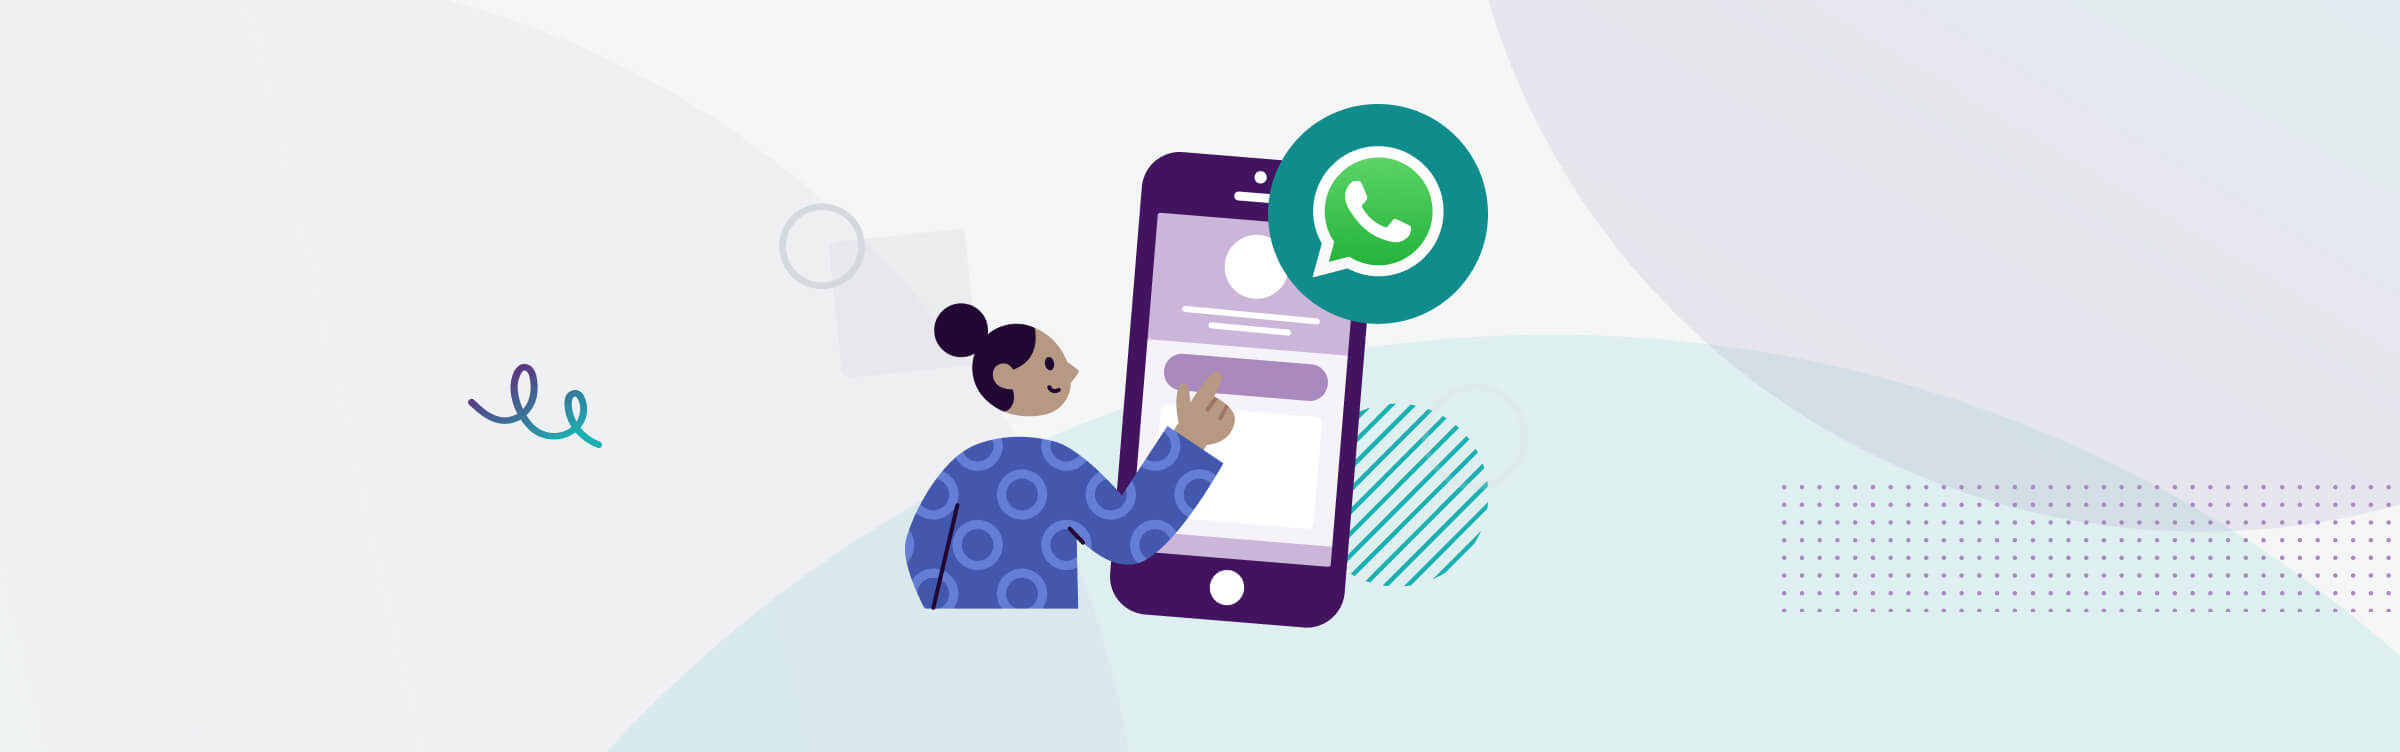 Image showing a person and the WhatsApp icon. Highlighting the ease of using WhatsApp as a business and for your customers.